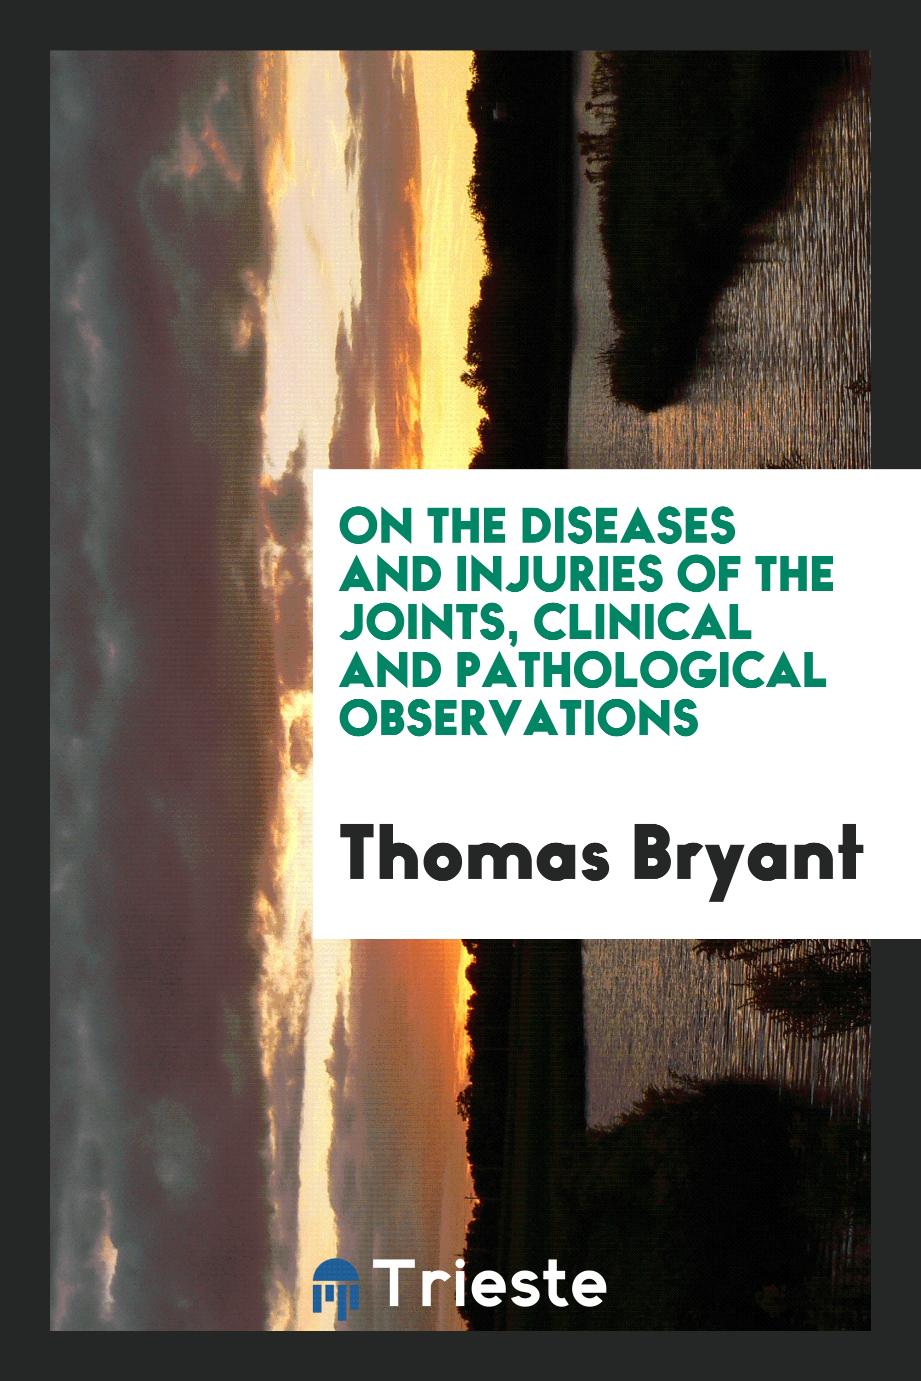 Thomas Bryant - On the diseases and injuries of the joints, clinical and pathological observations